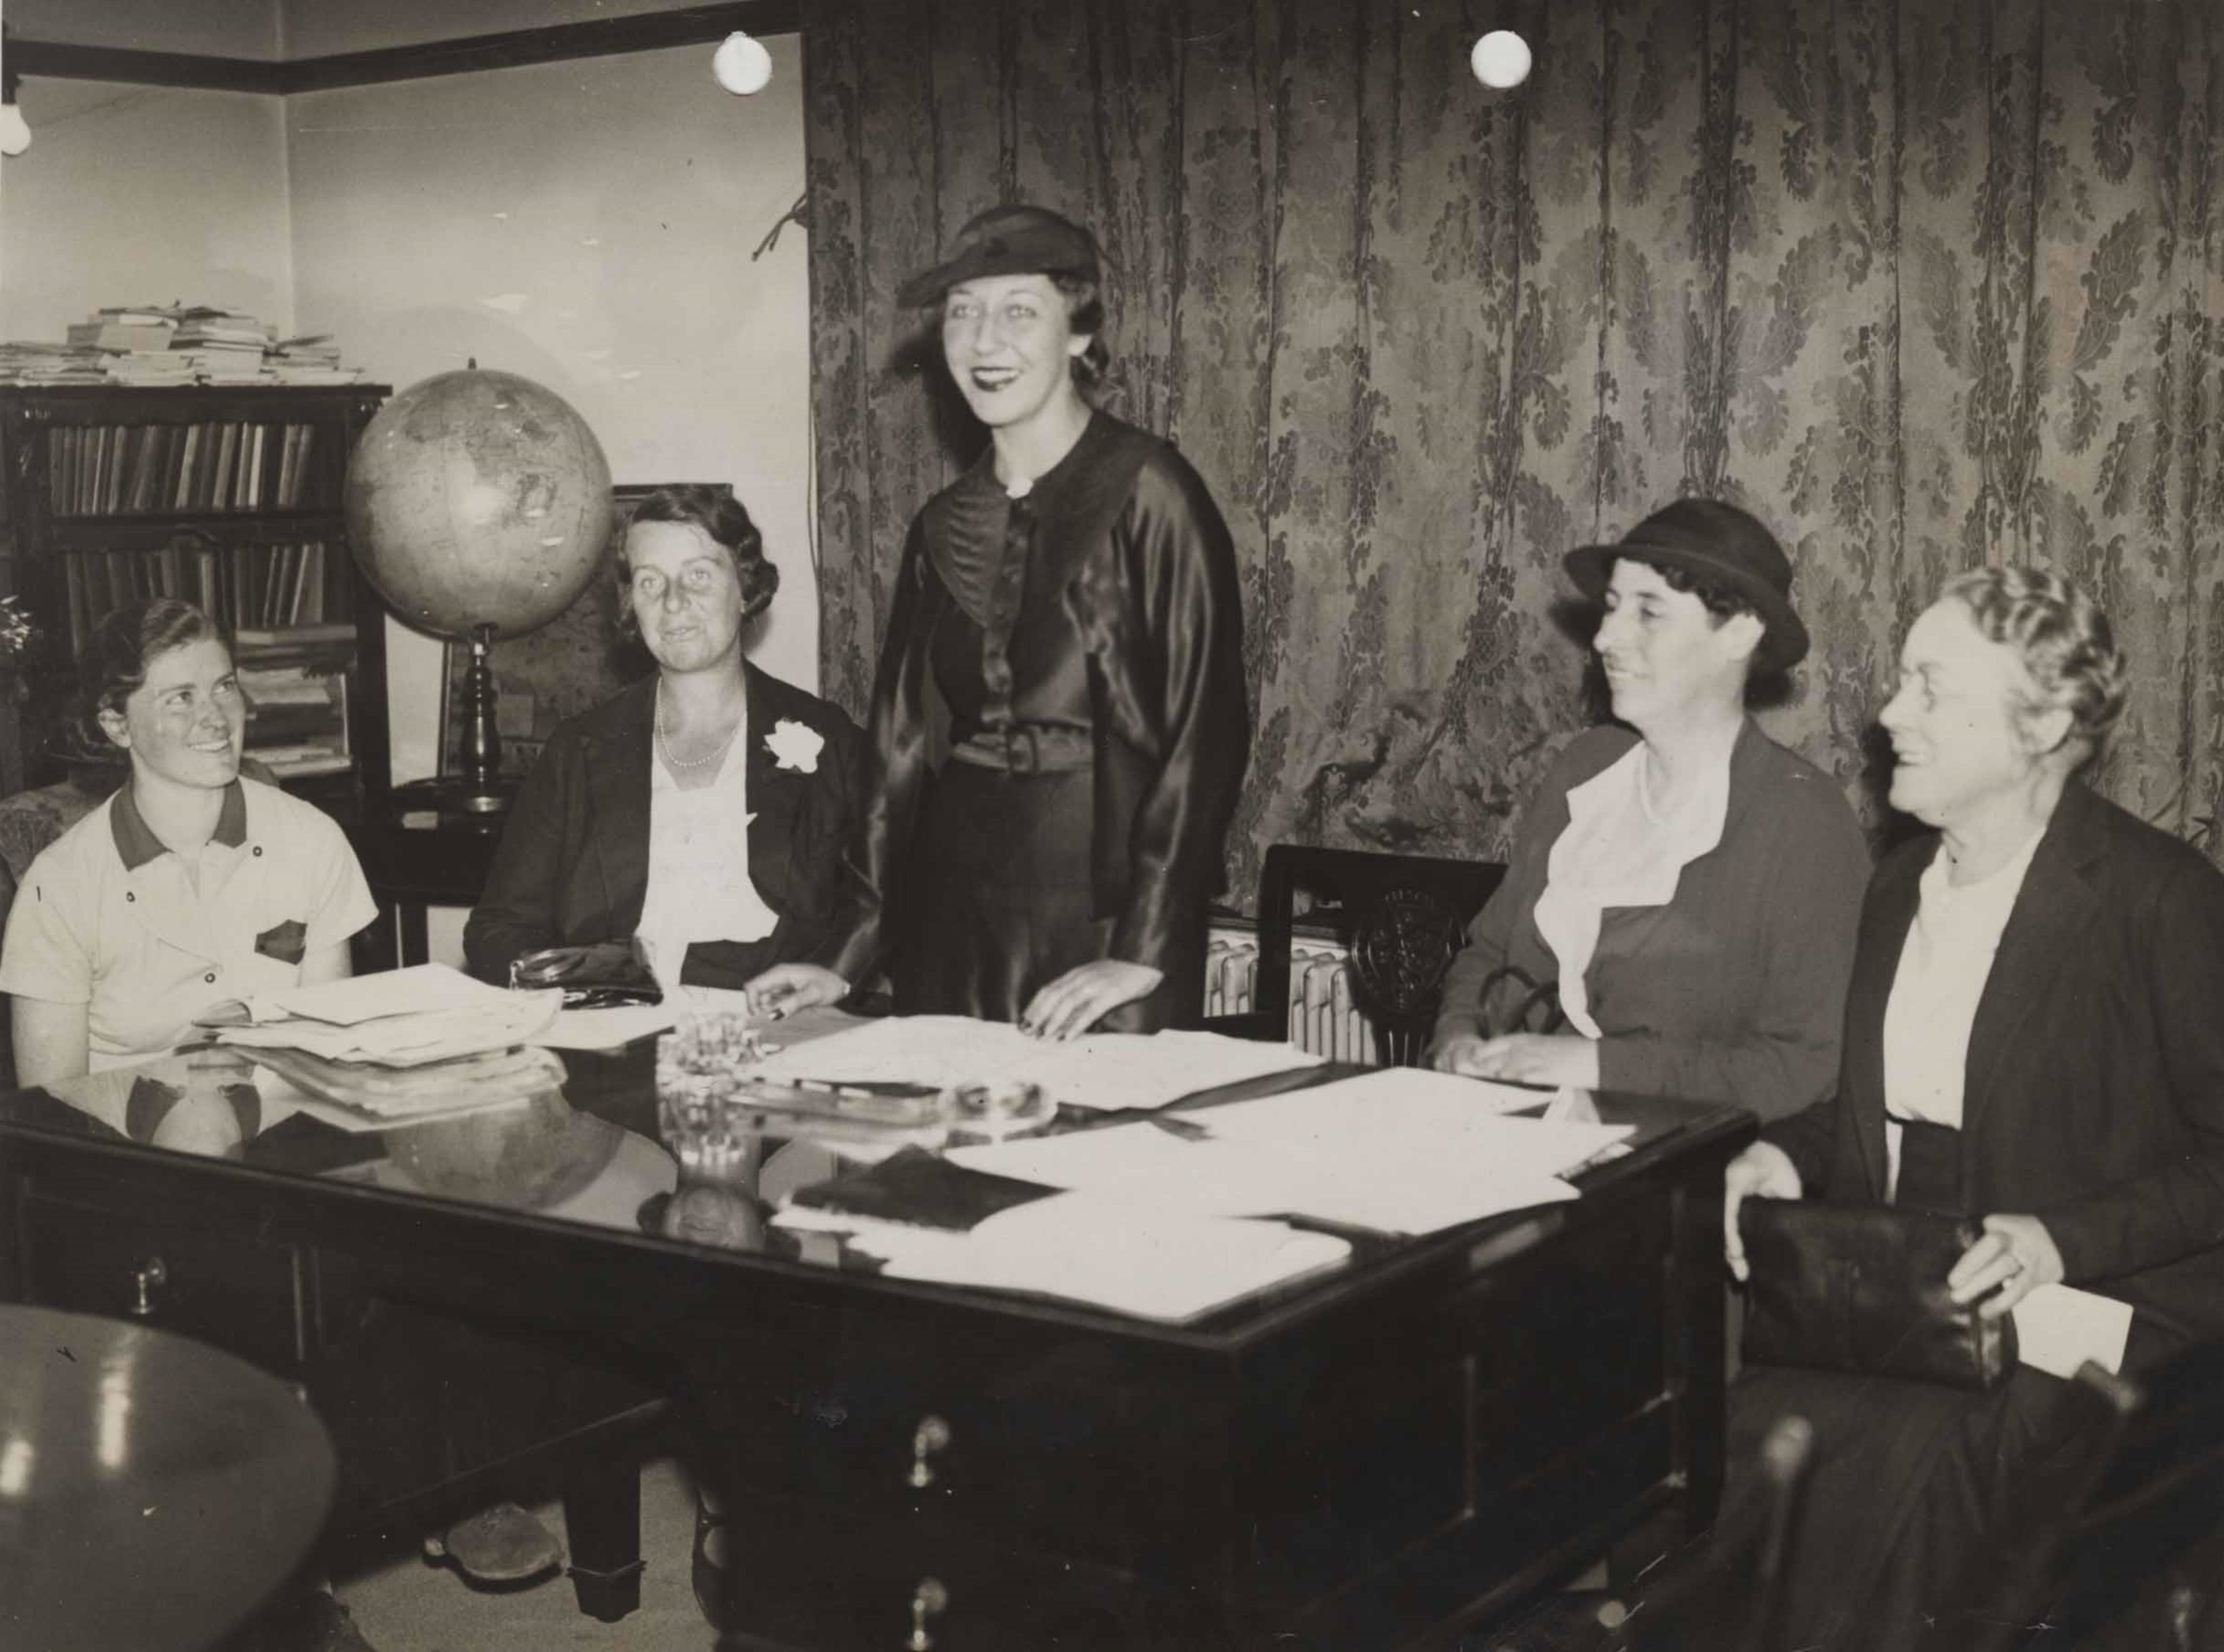 Women’s Engineering Society member and president, pilot Amy Johnson (standing), speaking at the WES annual conference in 1935. (Image: WES & the IET Archive)